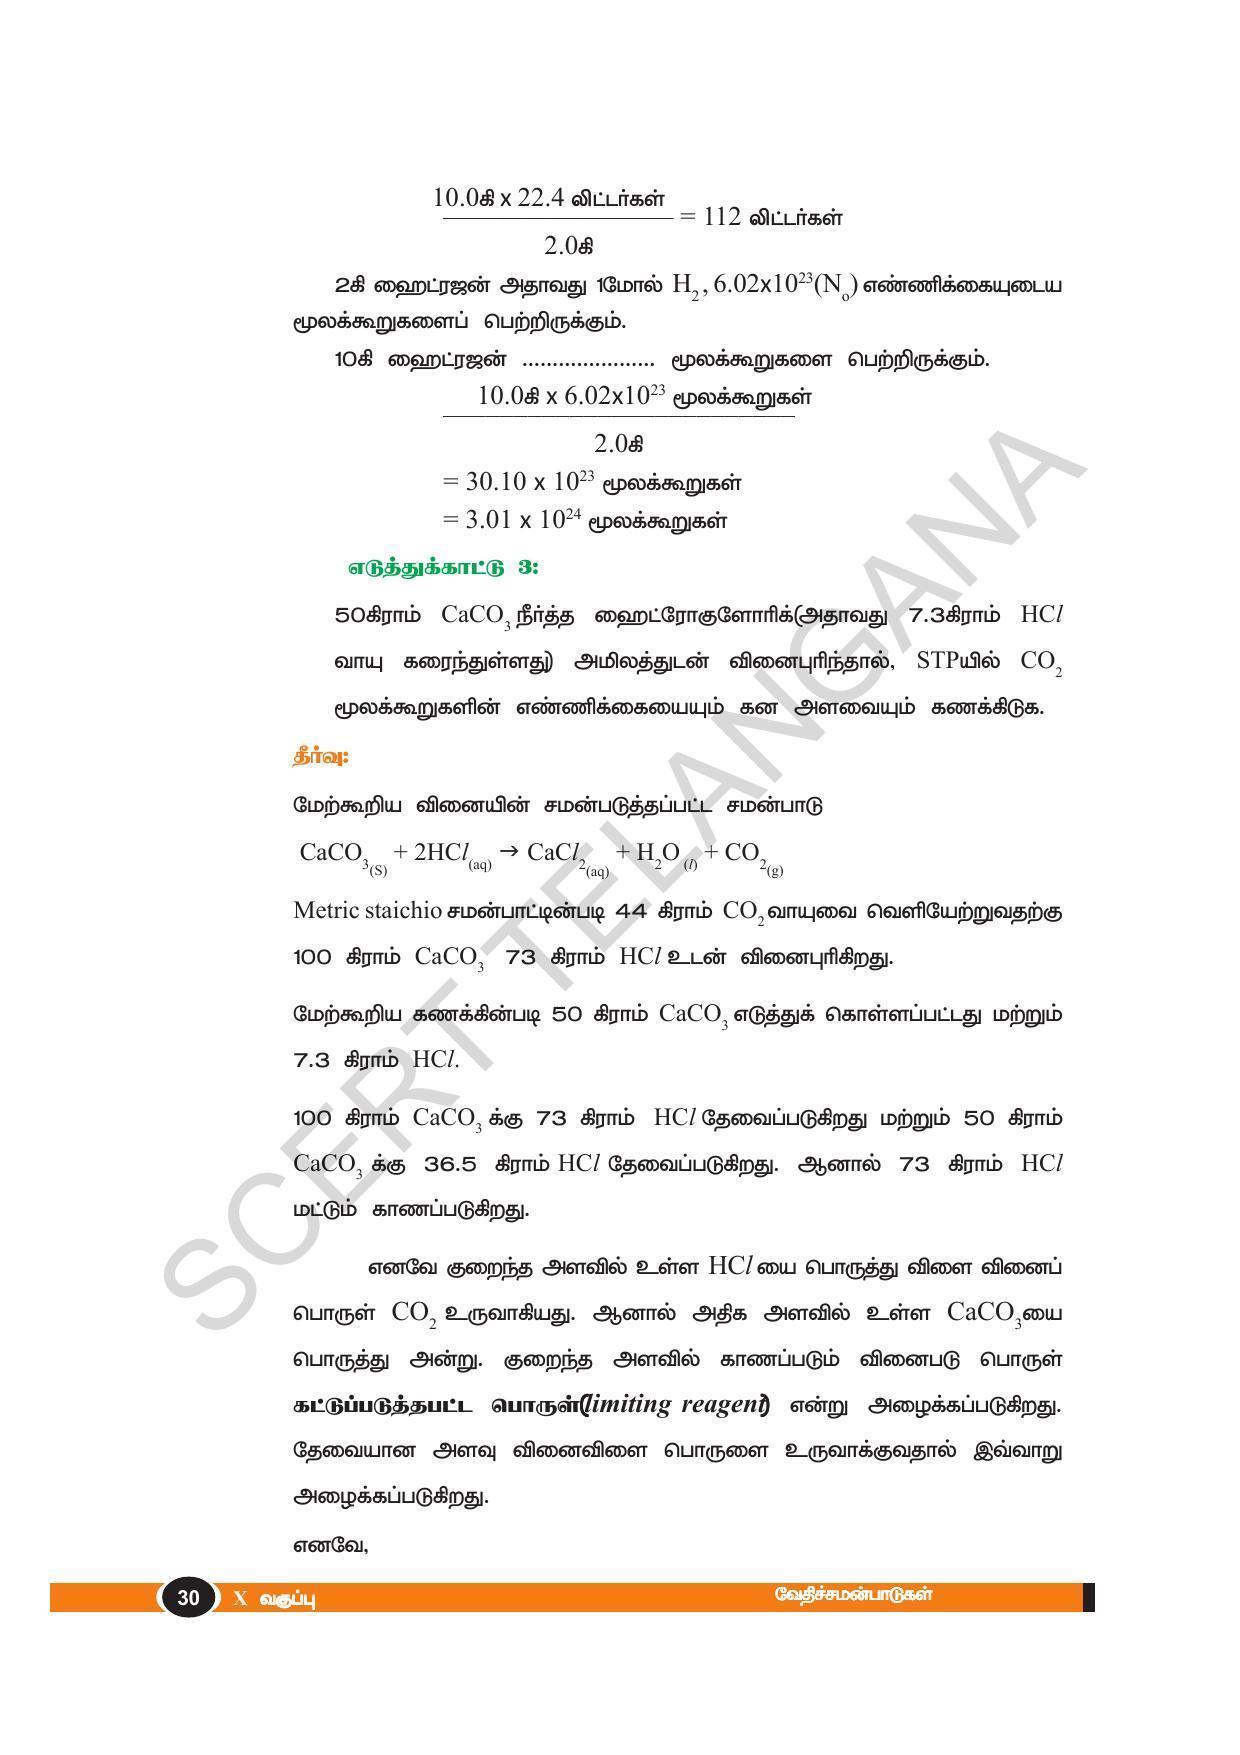 TS SCERT Class 10 Physical Science(Tamil Medium) Text Book - Page 42